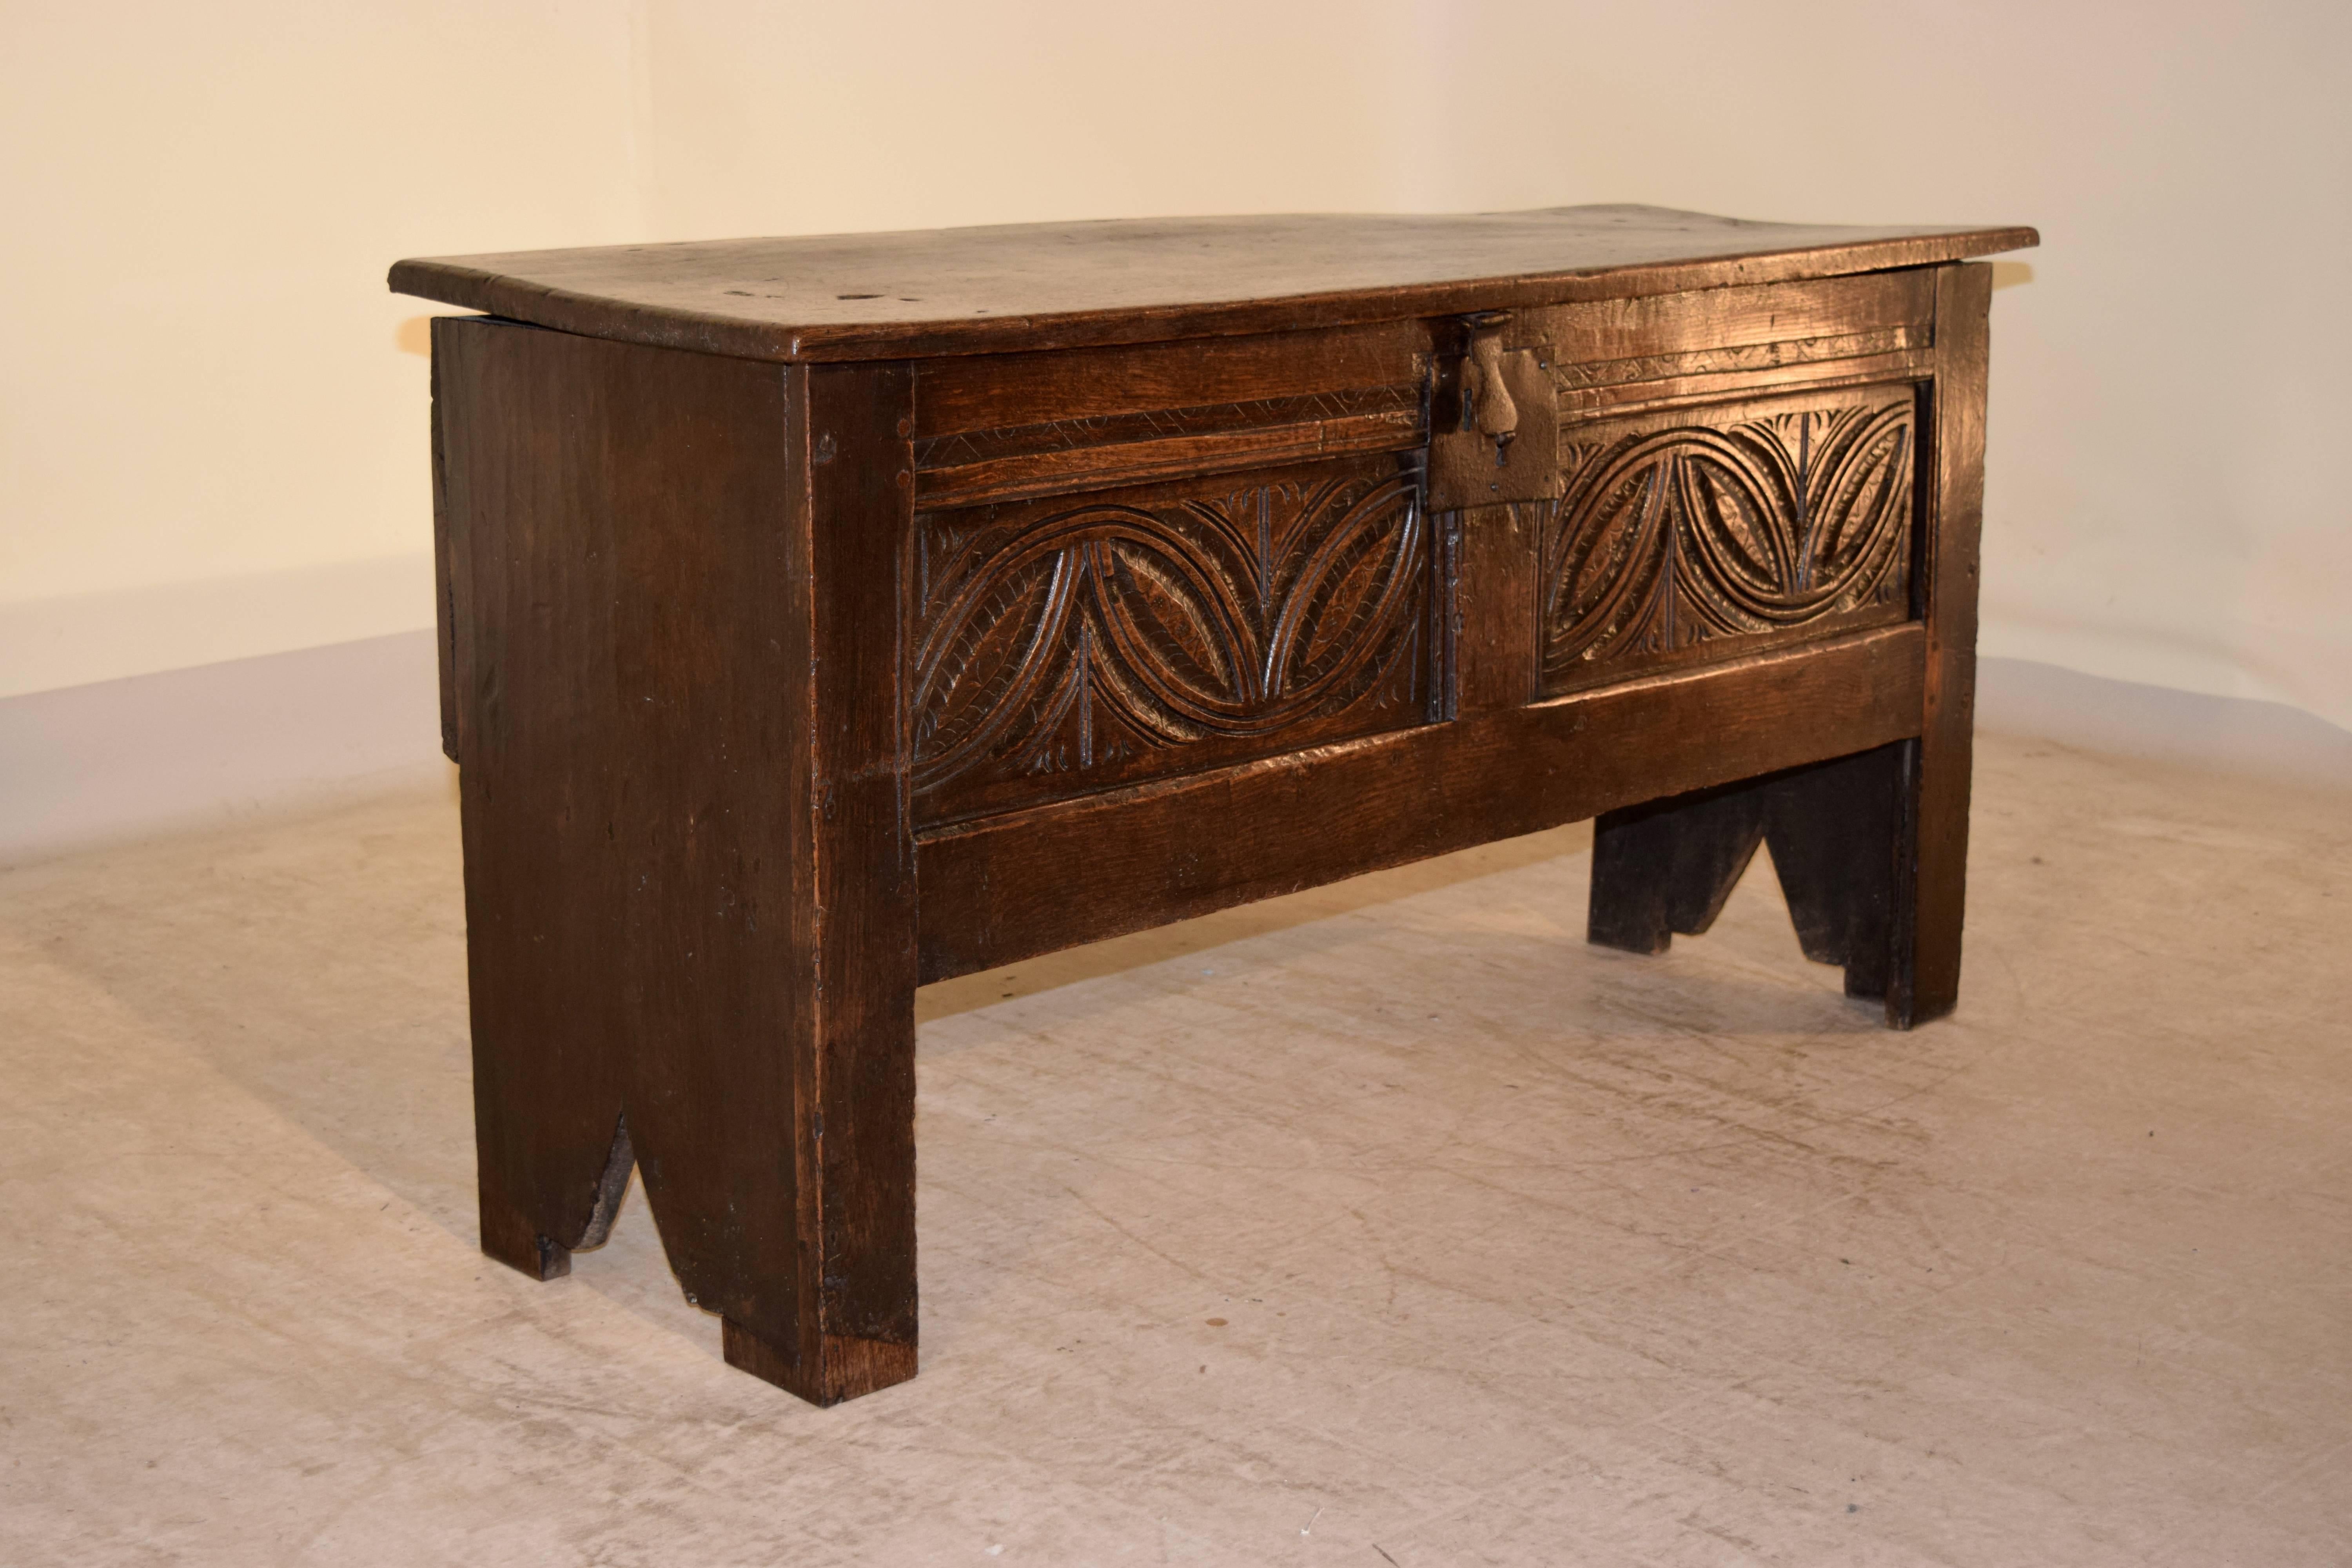 English oak sword chest, circa 1690-1720. The top is a single plank following down to a paneled front with hand-carved decorated panels and single plank sides with decorative patterned feet. The hardware appears to be original and made of iron.